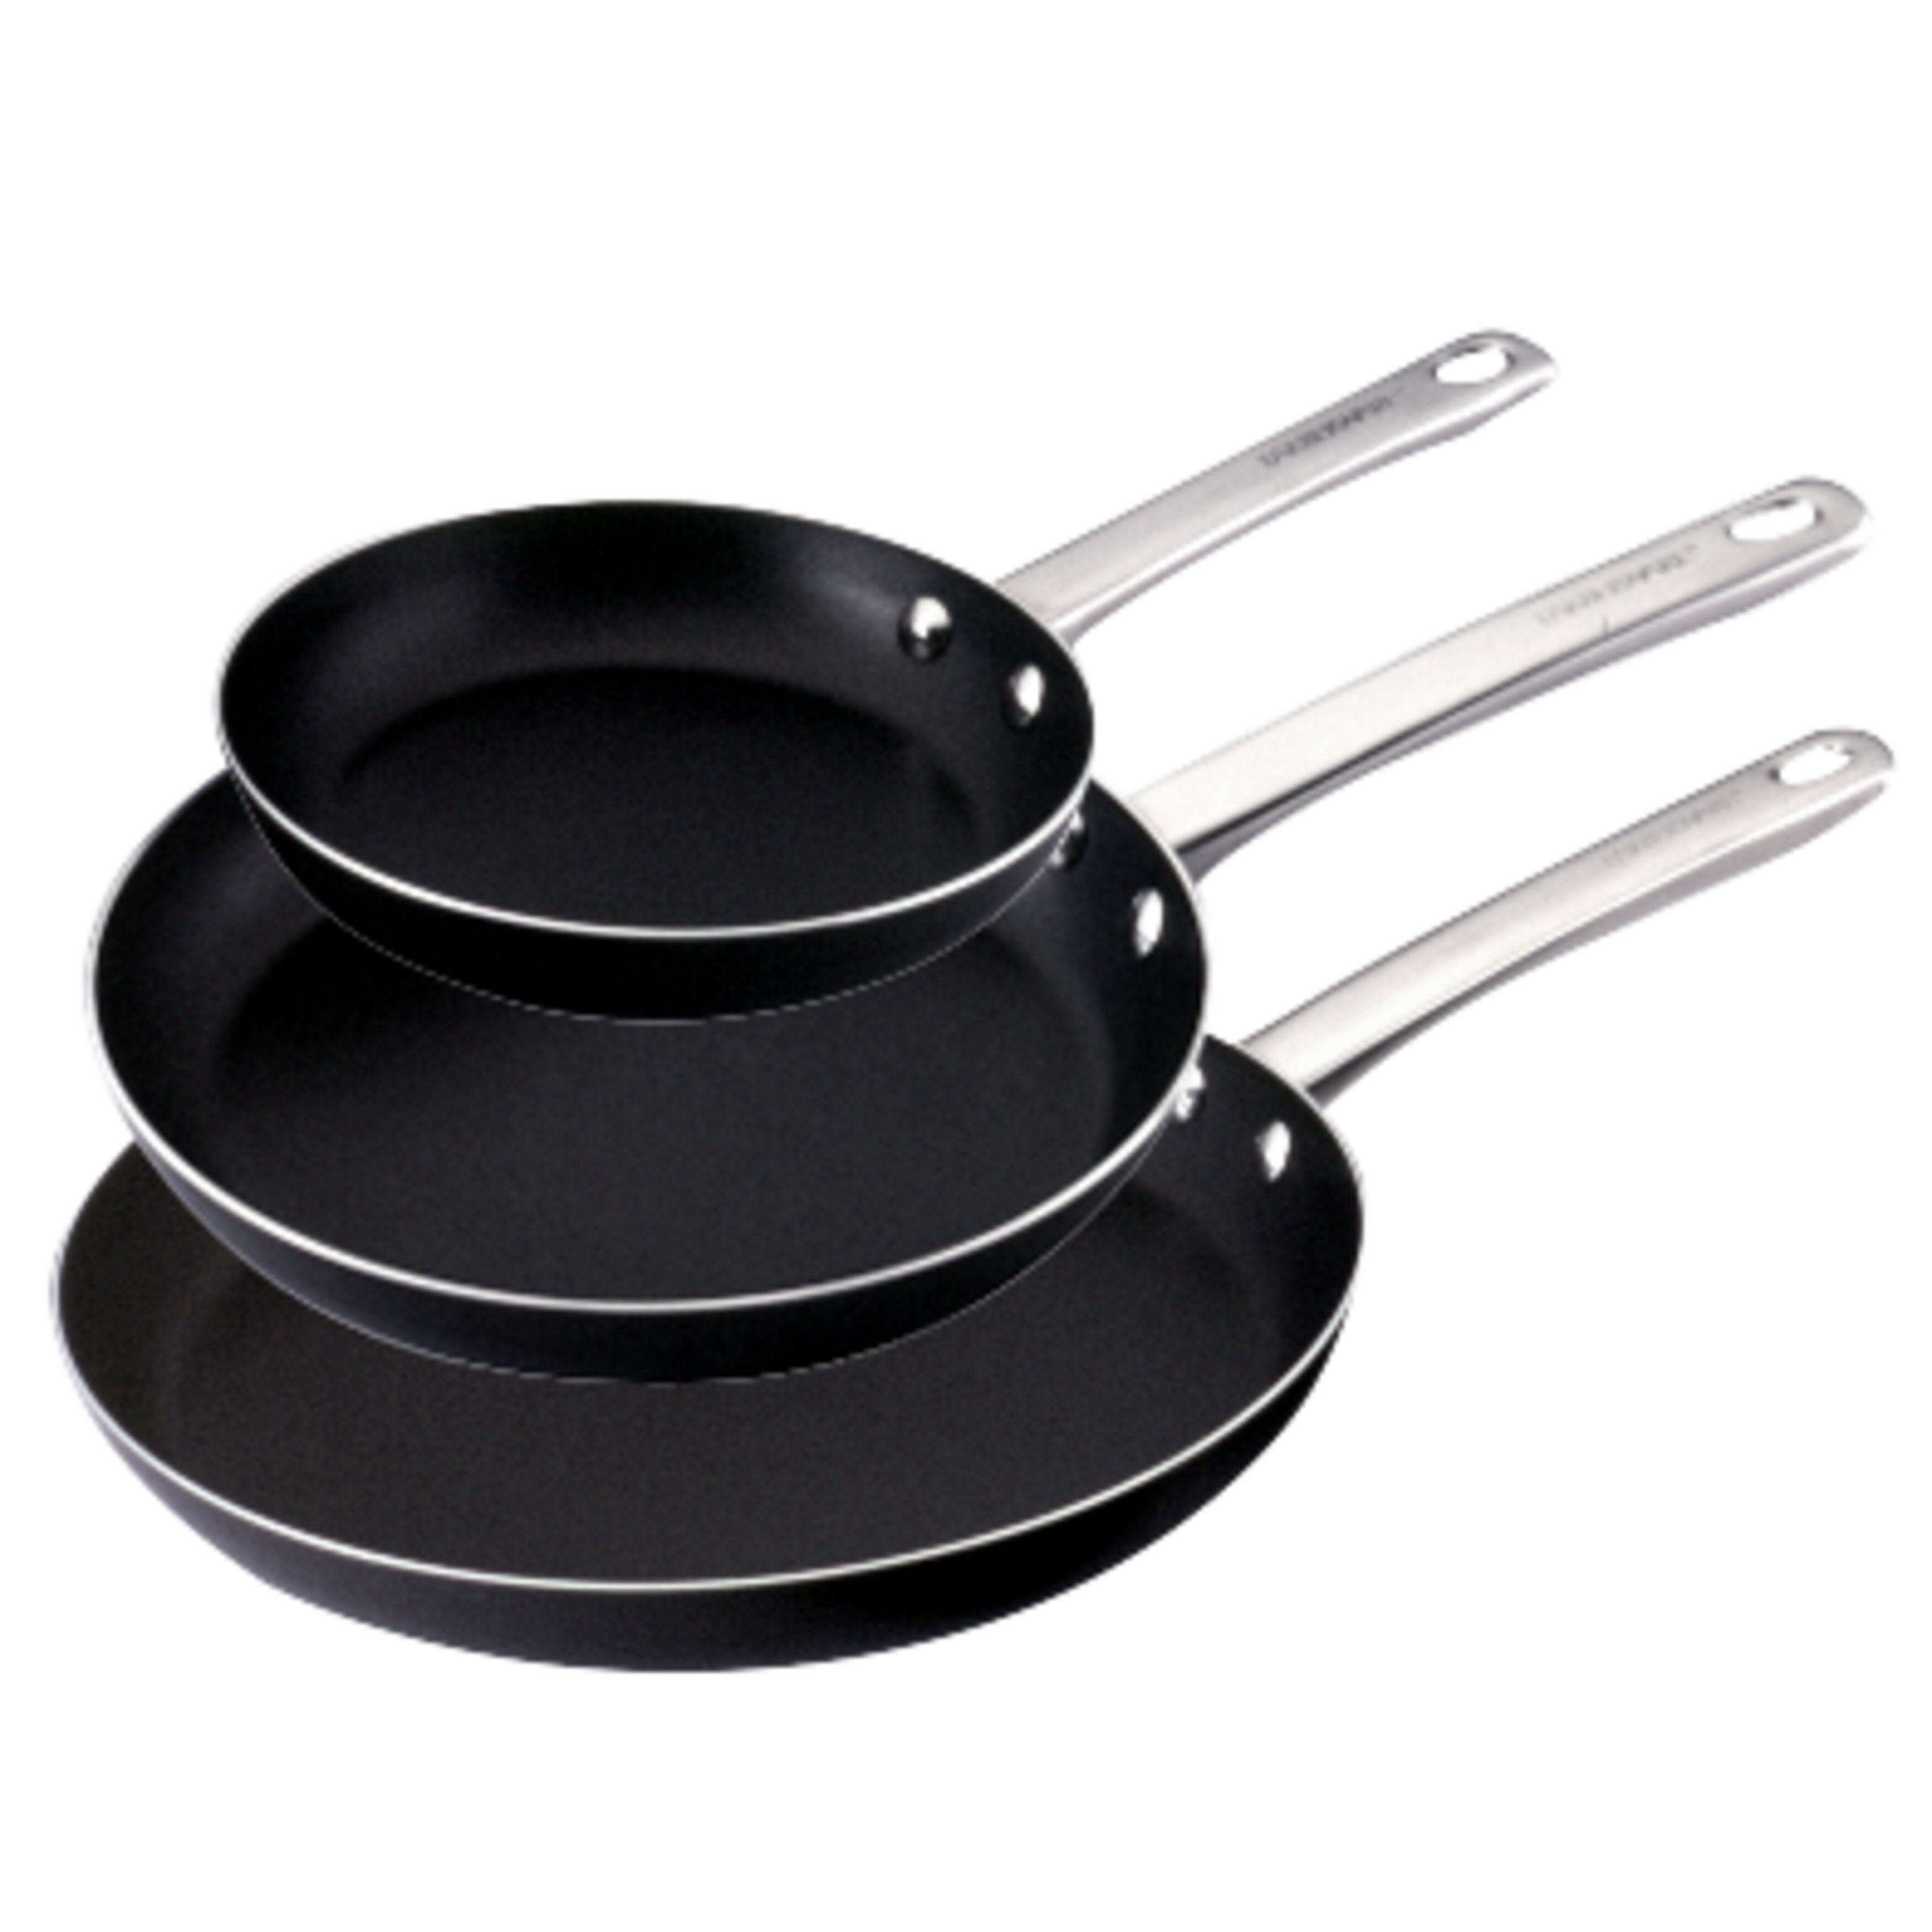 OXO Softworks Non-Stick 2-Piece Frypan Set (10.24 in / 12 in) - Black